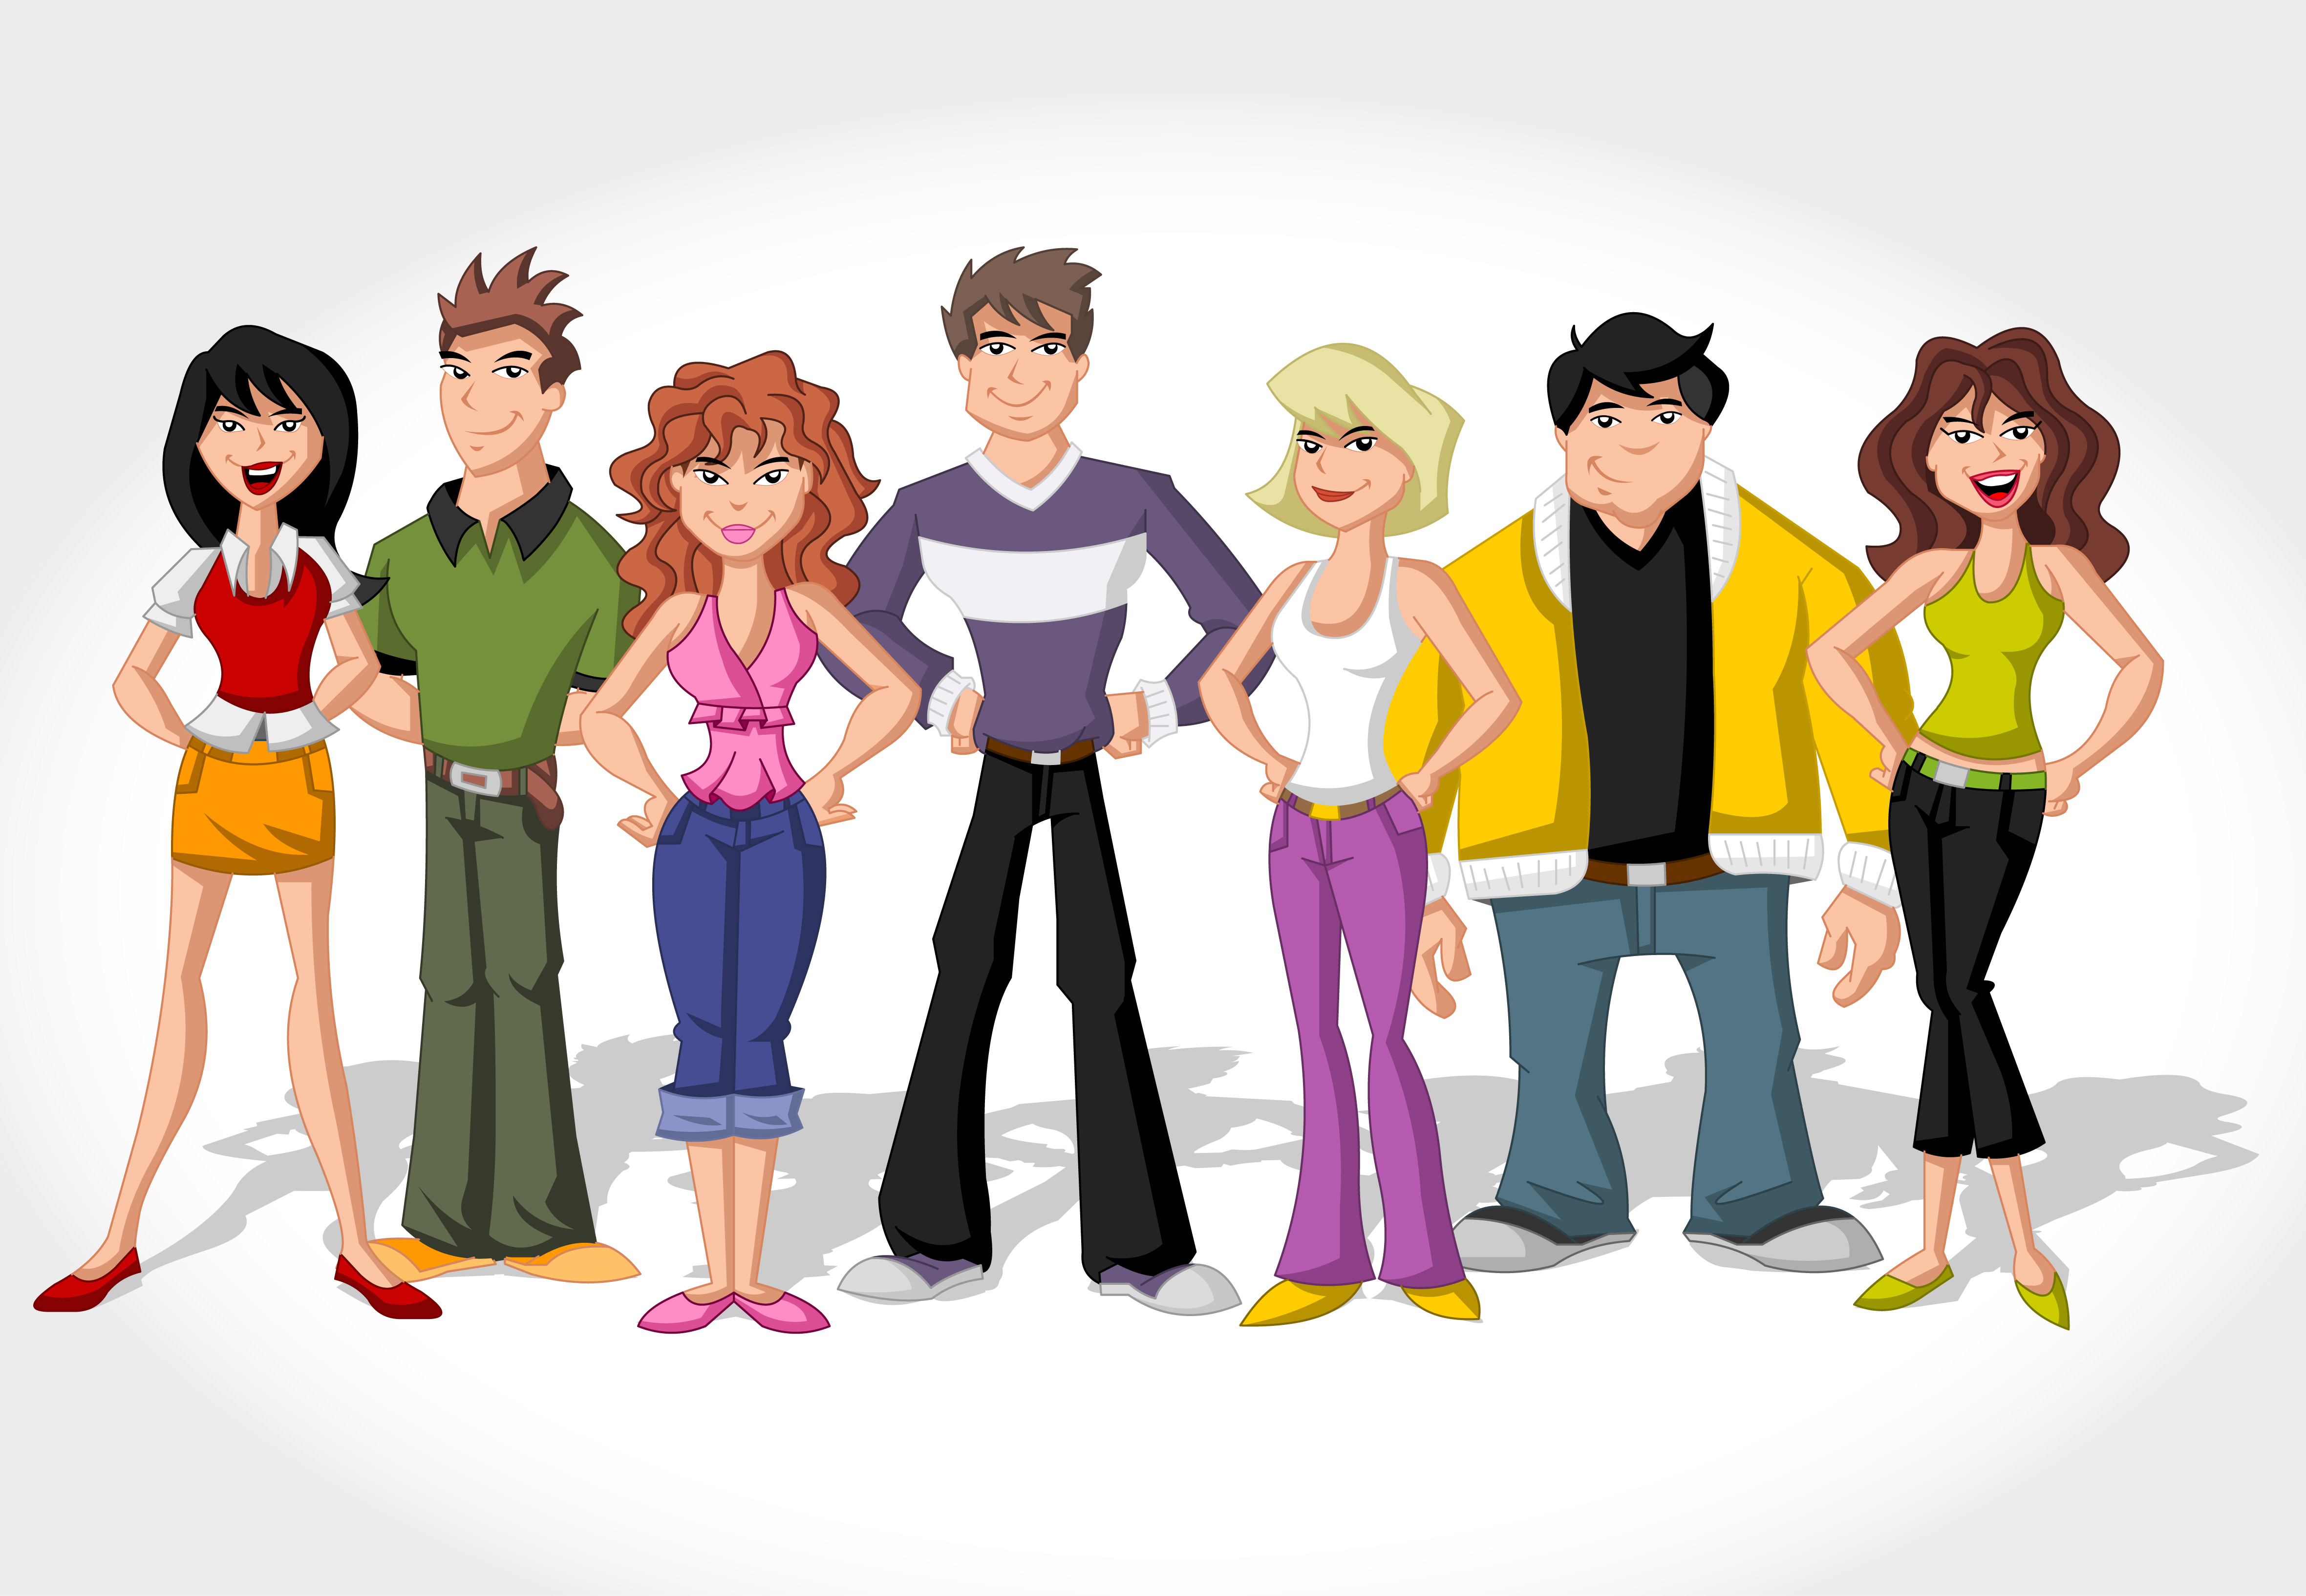 Free clipart group of people cartoon - ClipArt Best - ClipArt Best